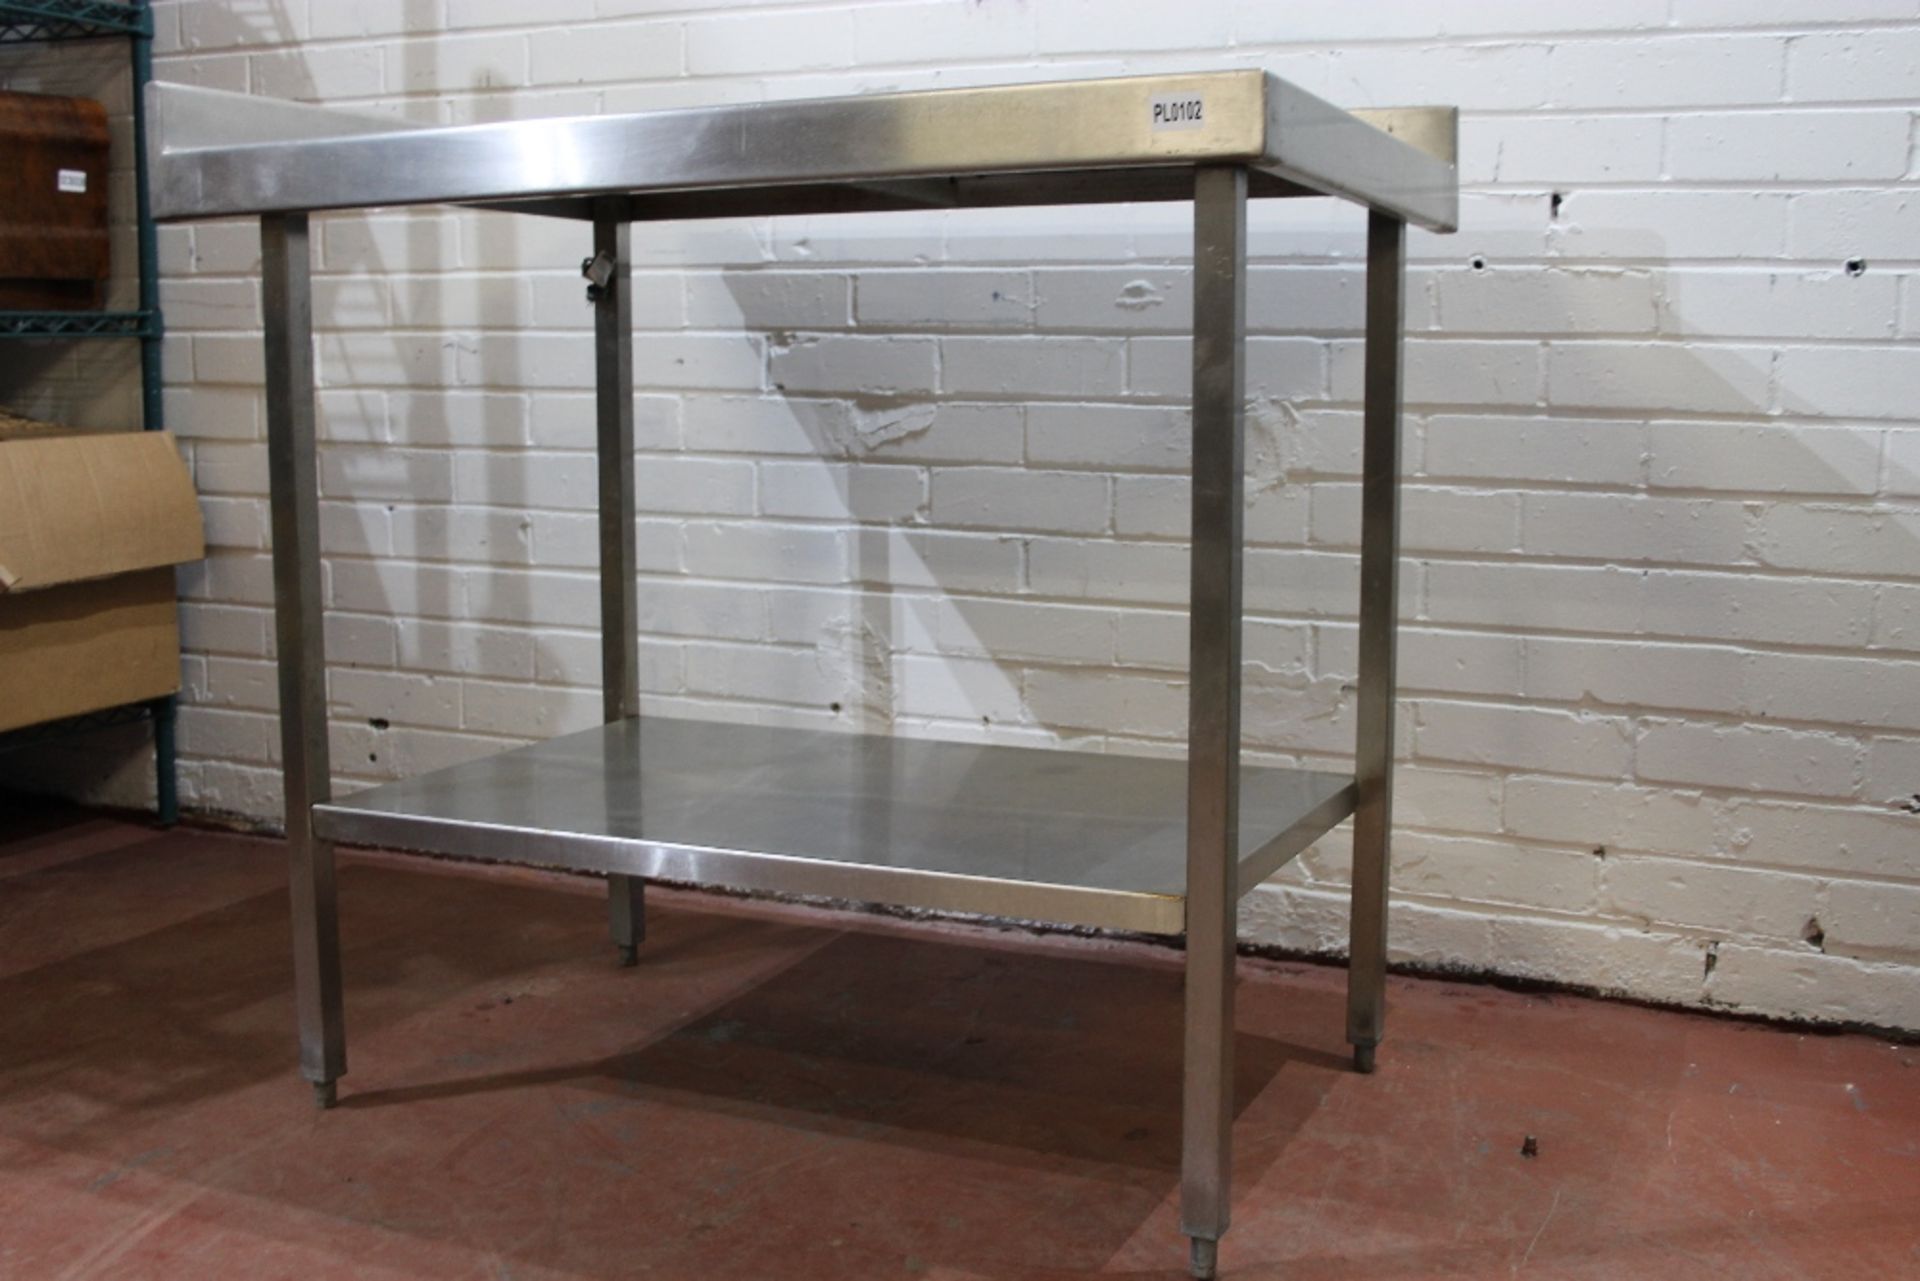 Stainless Steel Table with Under Shelf + Corner Splash Back – W100cm x H87 table surface H91 top